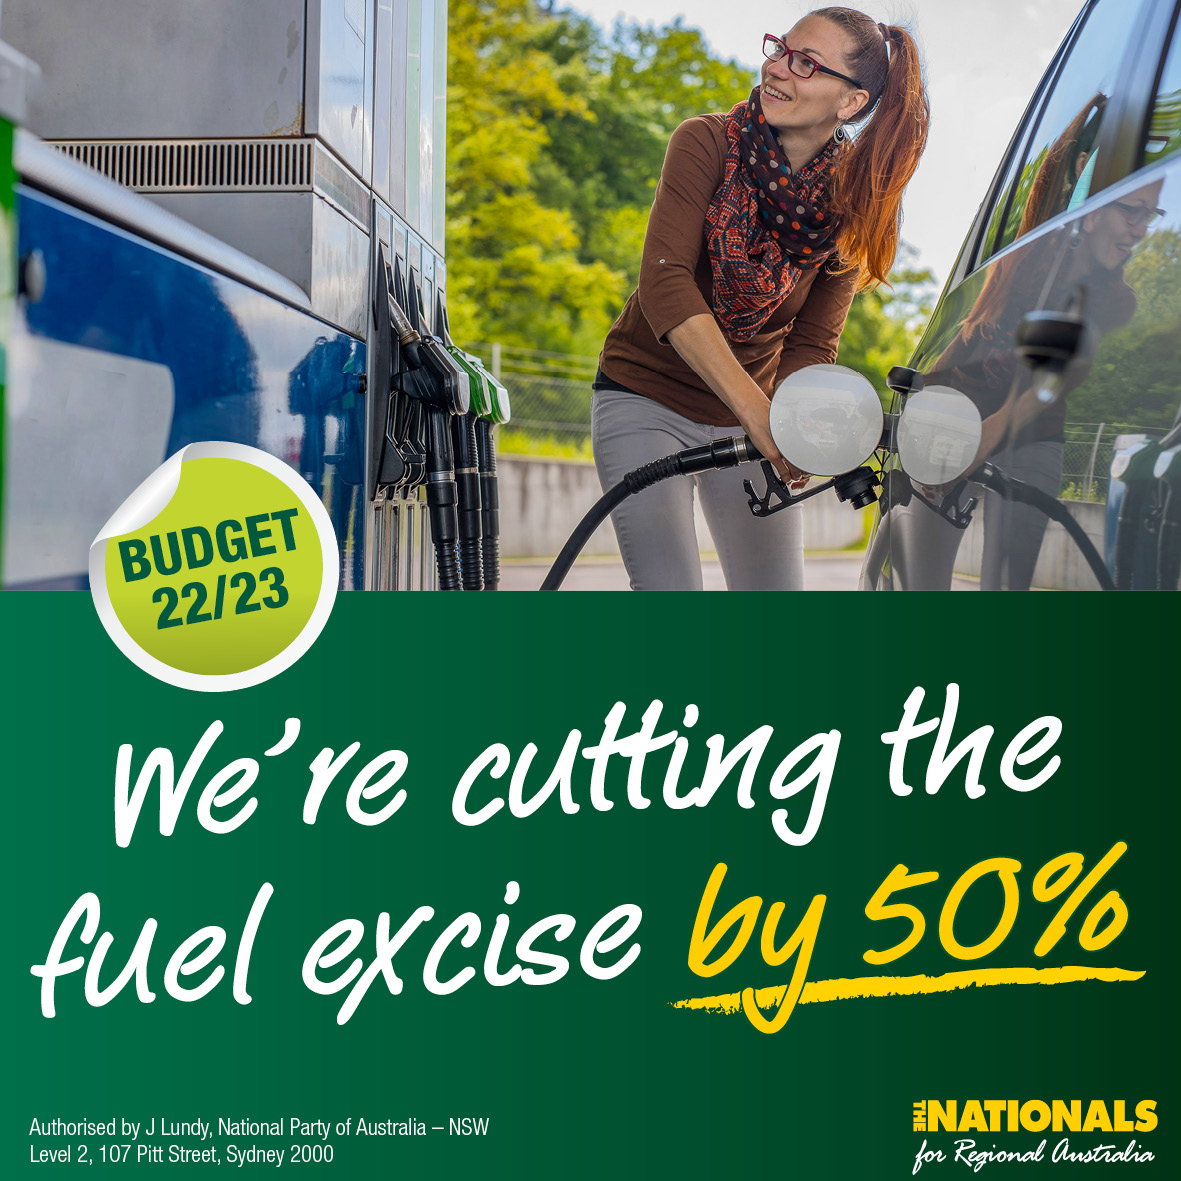 fuel-excise-cut-in-half-nsw-nationals